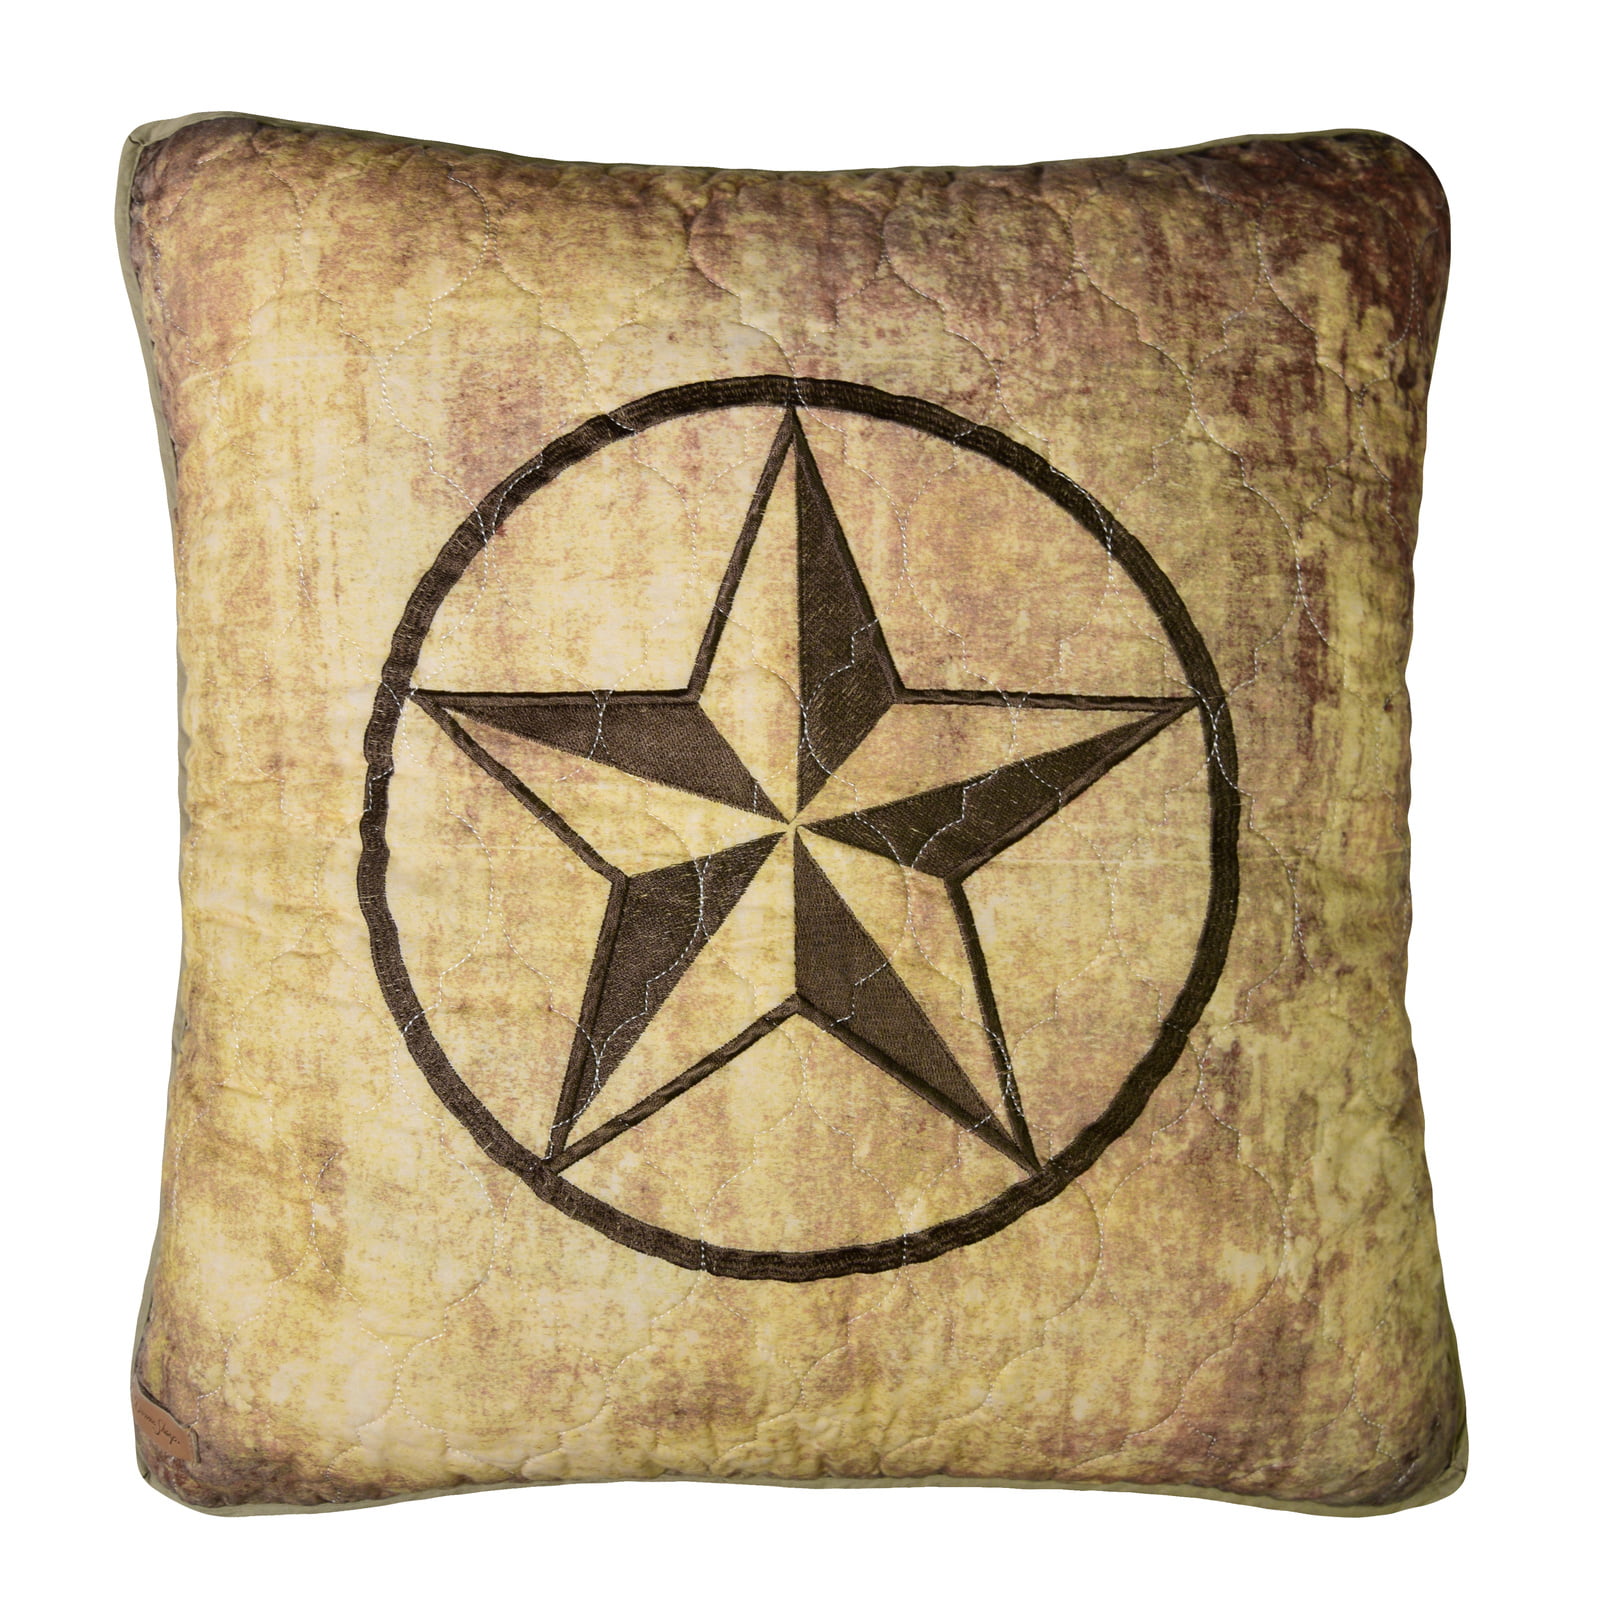 54462 18 X 18 In. Wood Patch Decorative Star Pillow, Multi Color